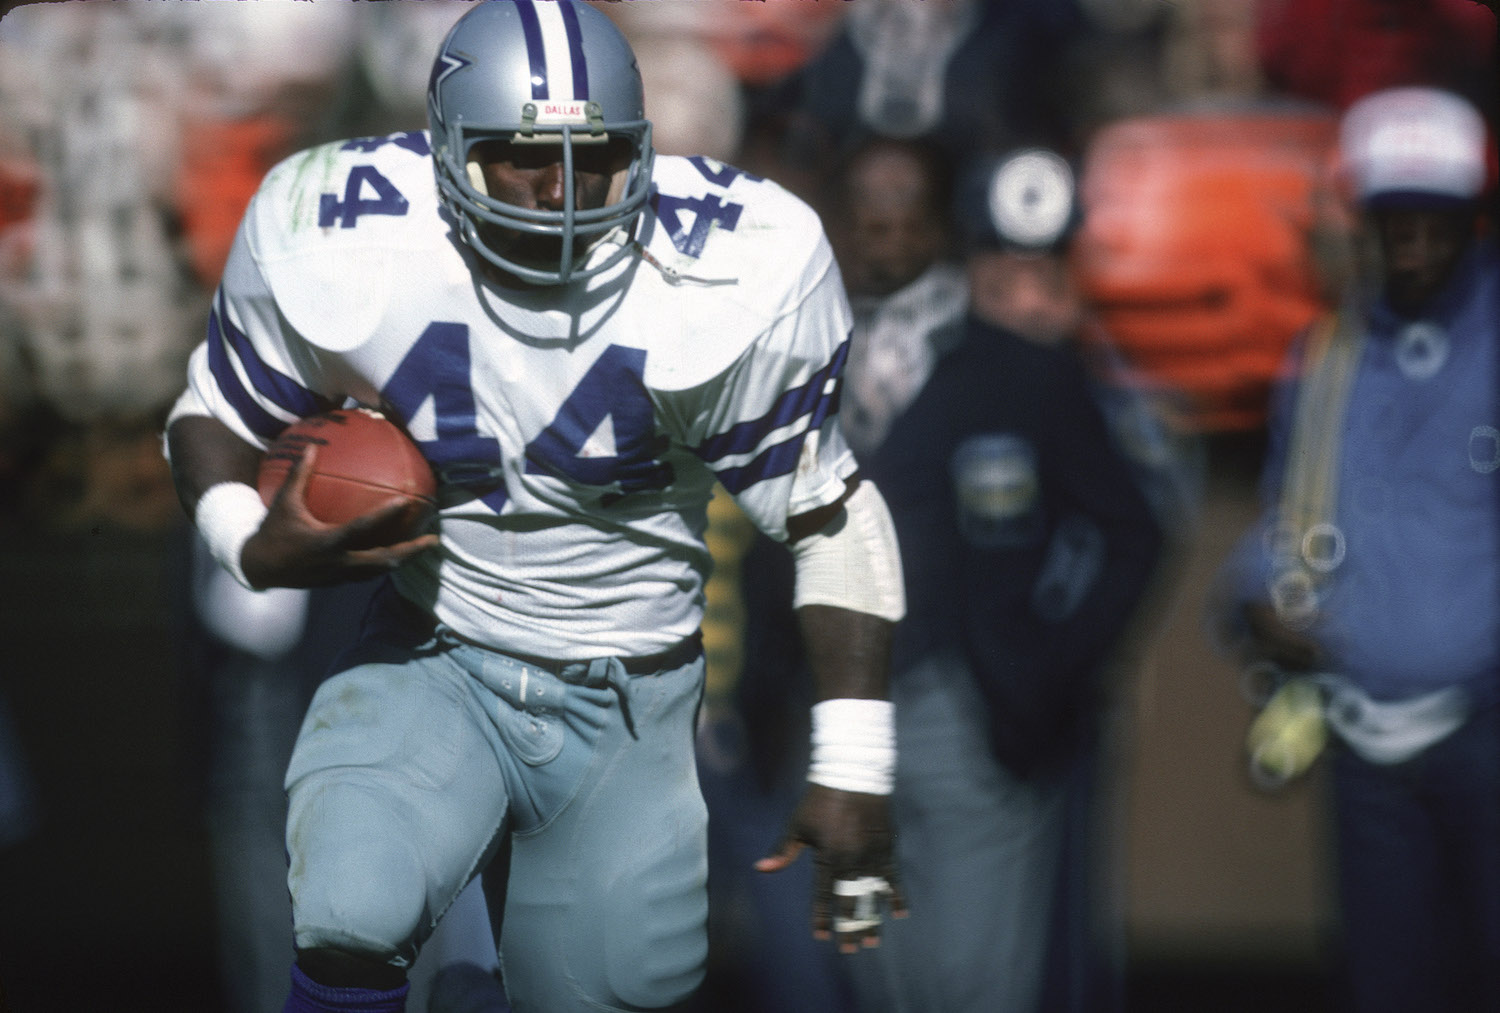 Robert Newhouse of the Dallas Cowboys